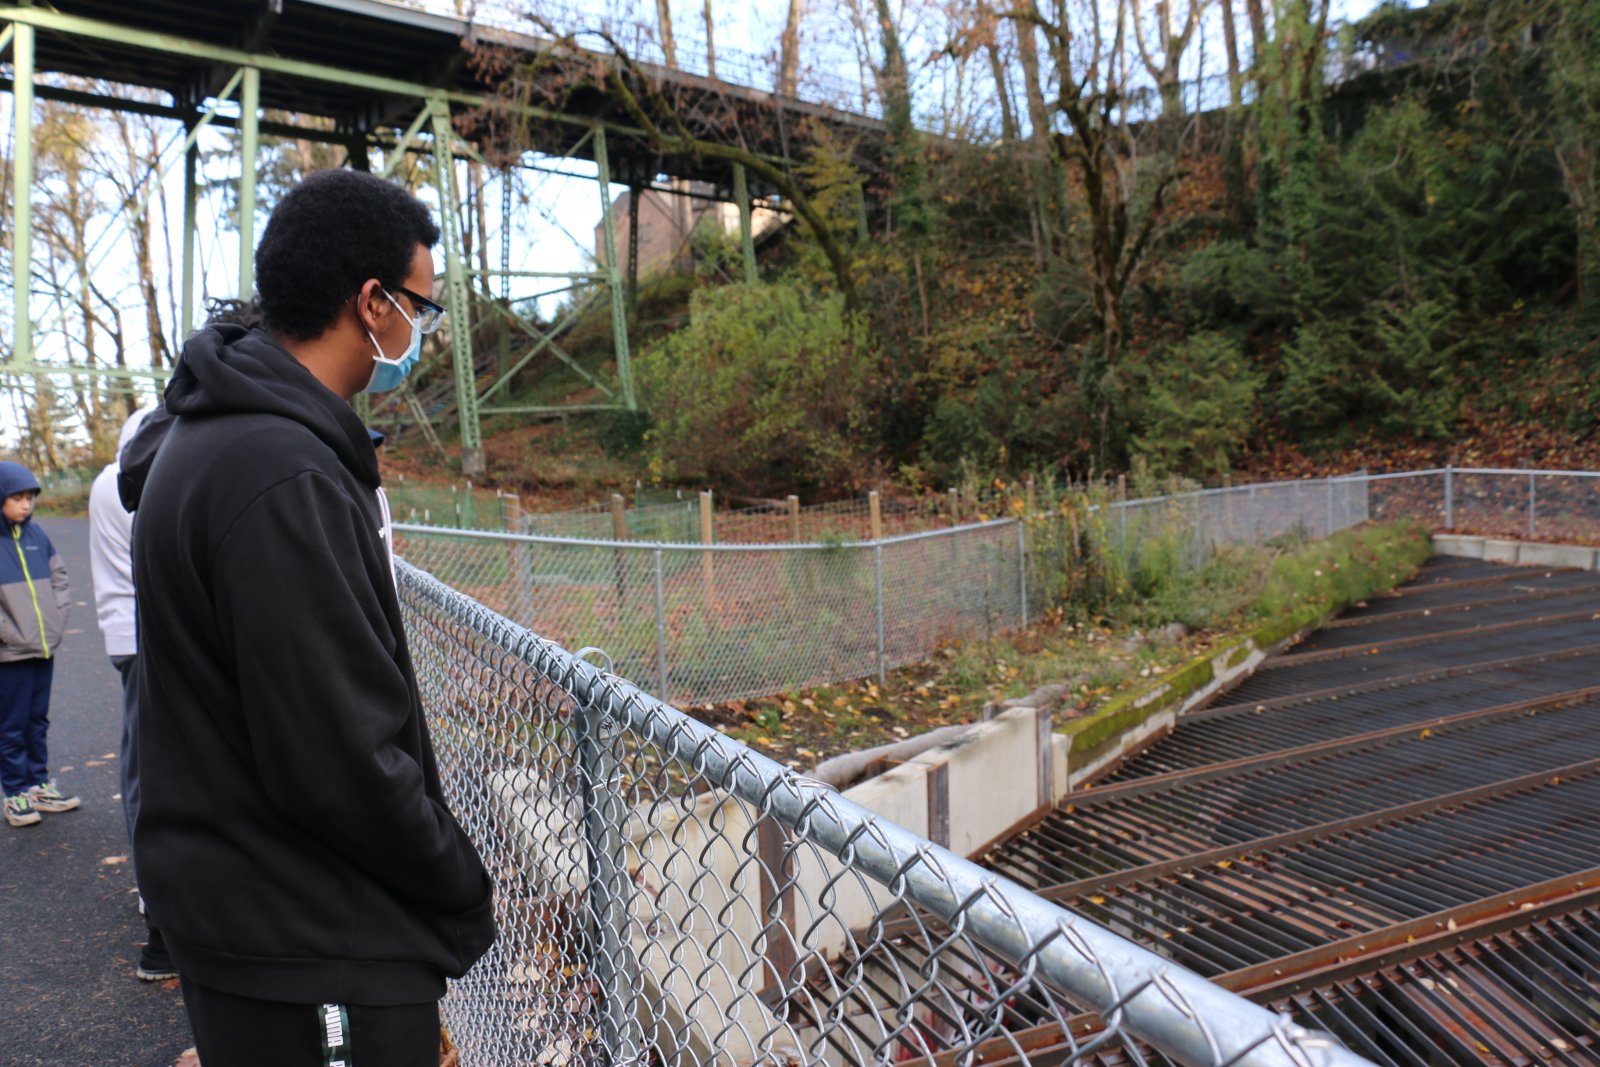 Student looking over the railing of a bridge in a nature park in a STEAM Career Tracks Saturday workshop